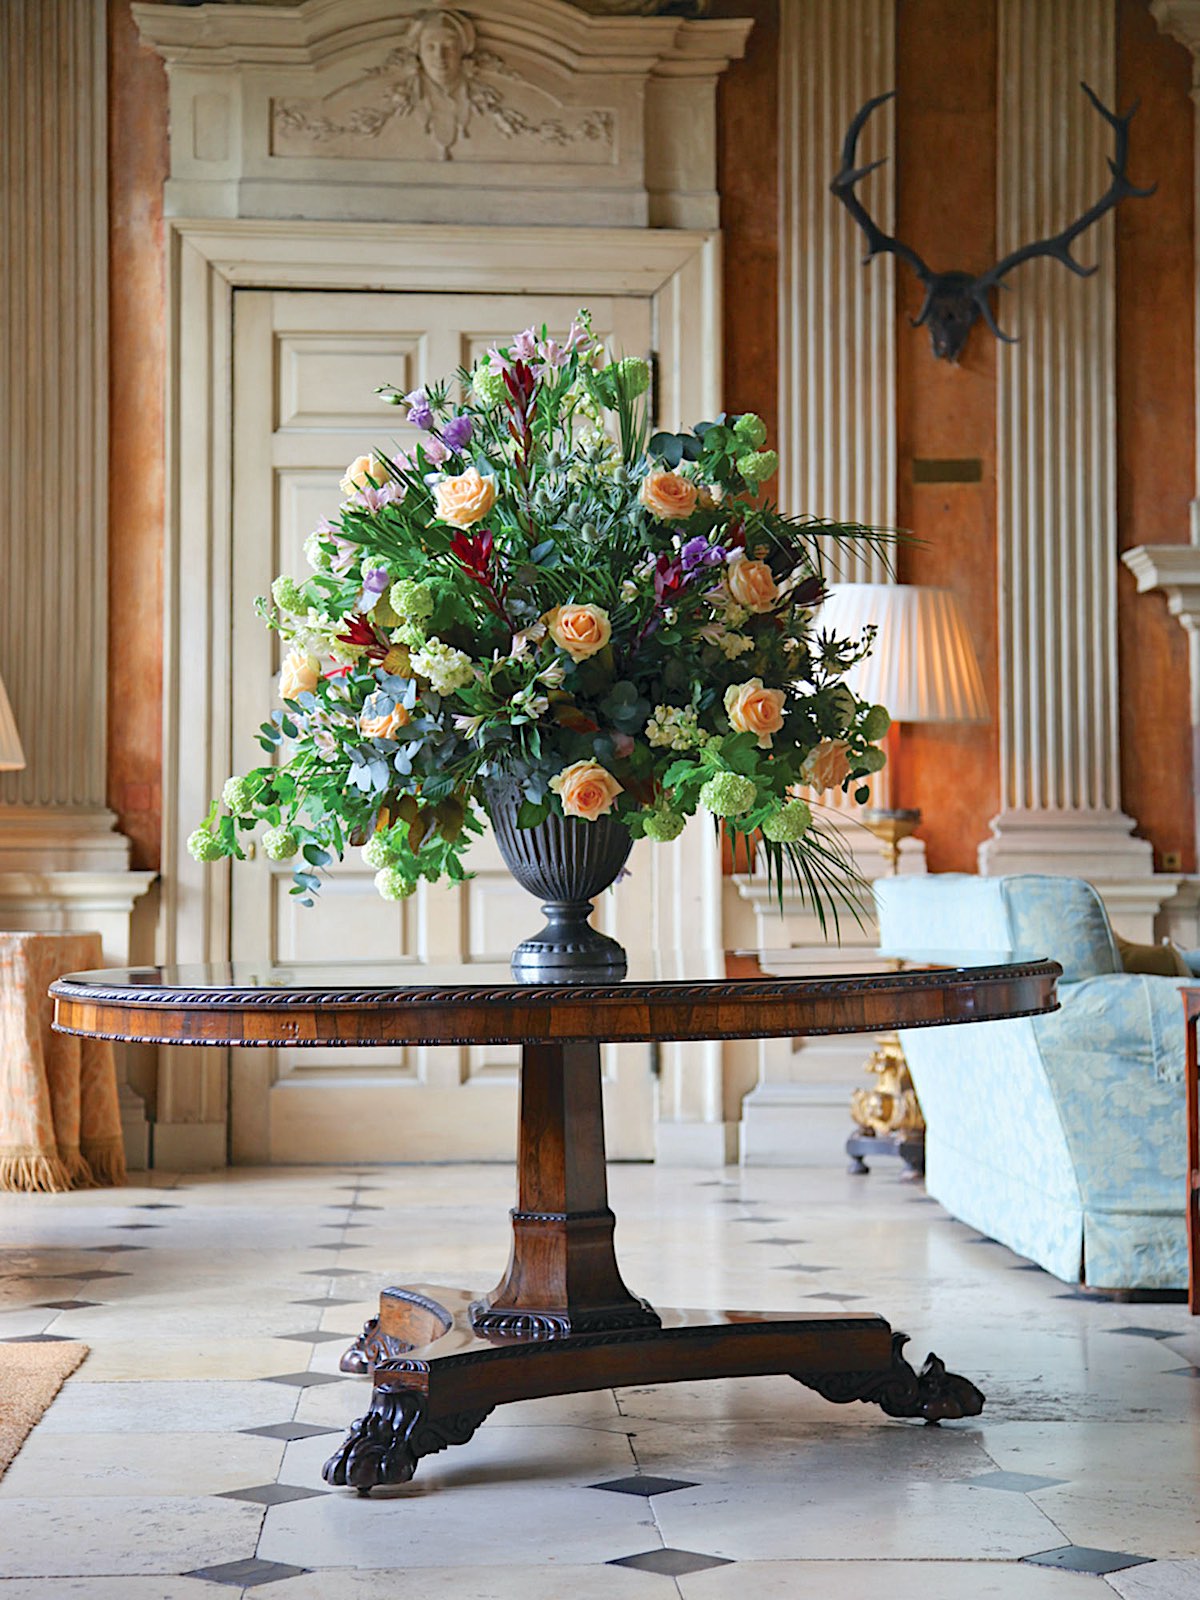 An urn of flowers welcomes in the saloon at Ditchley.